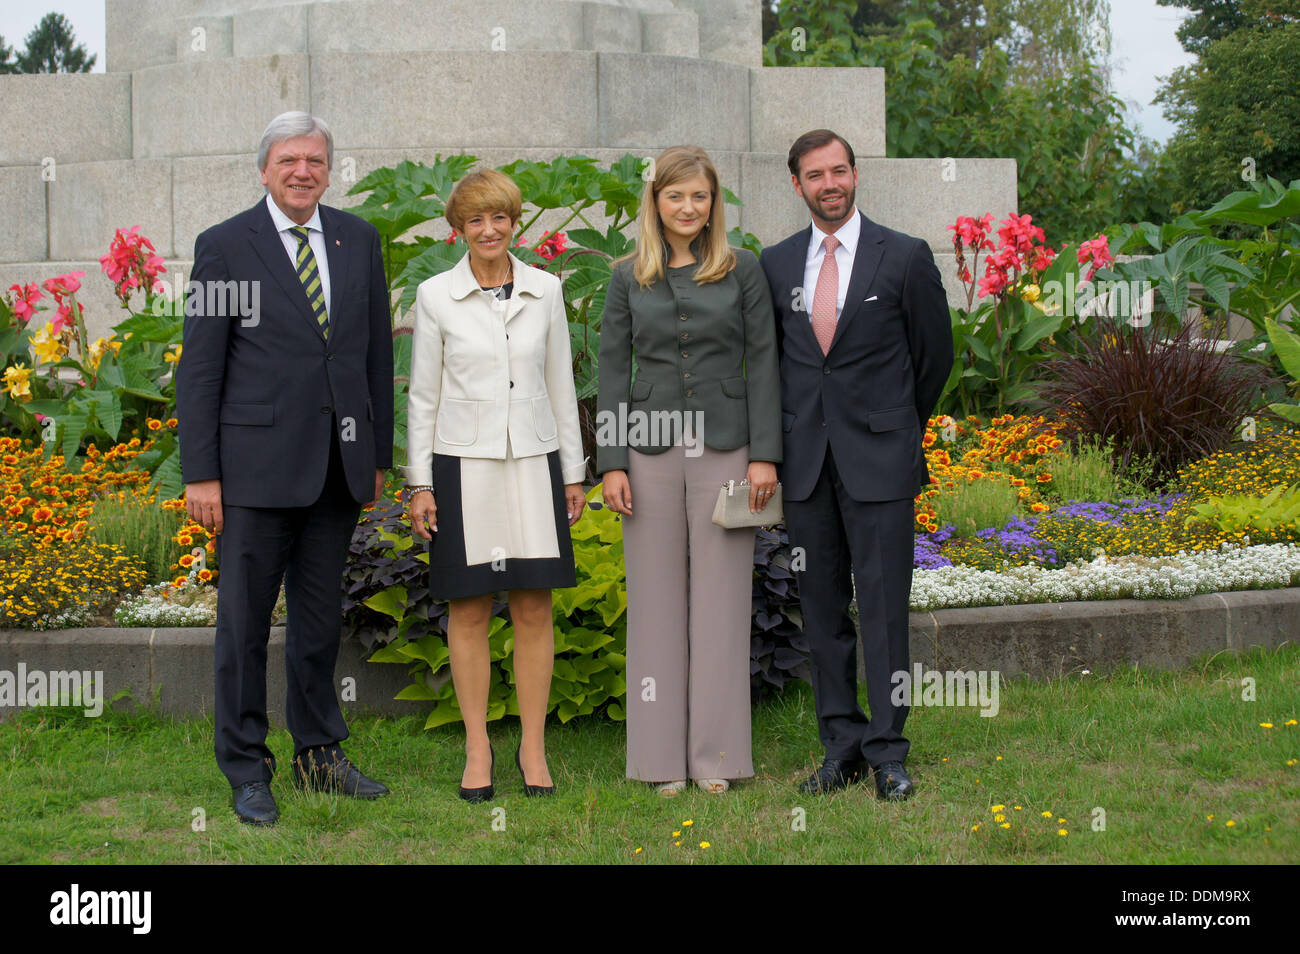 Grand duke and duchess Guillaume and Stéfanie of Luxemburg and chief minister of Hessen, Volker Bouffier with wife Ursula visit the monument of Nassau in Wiesbaden. Stock Photo